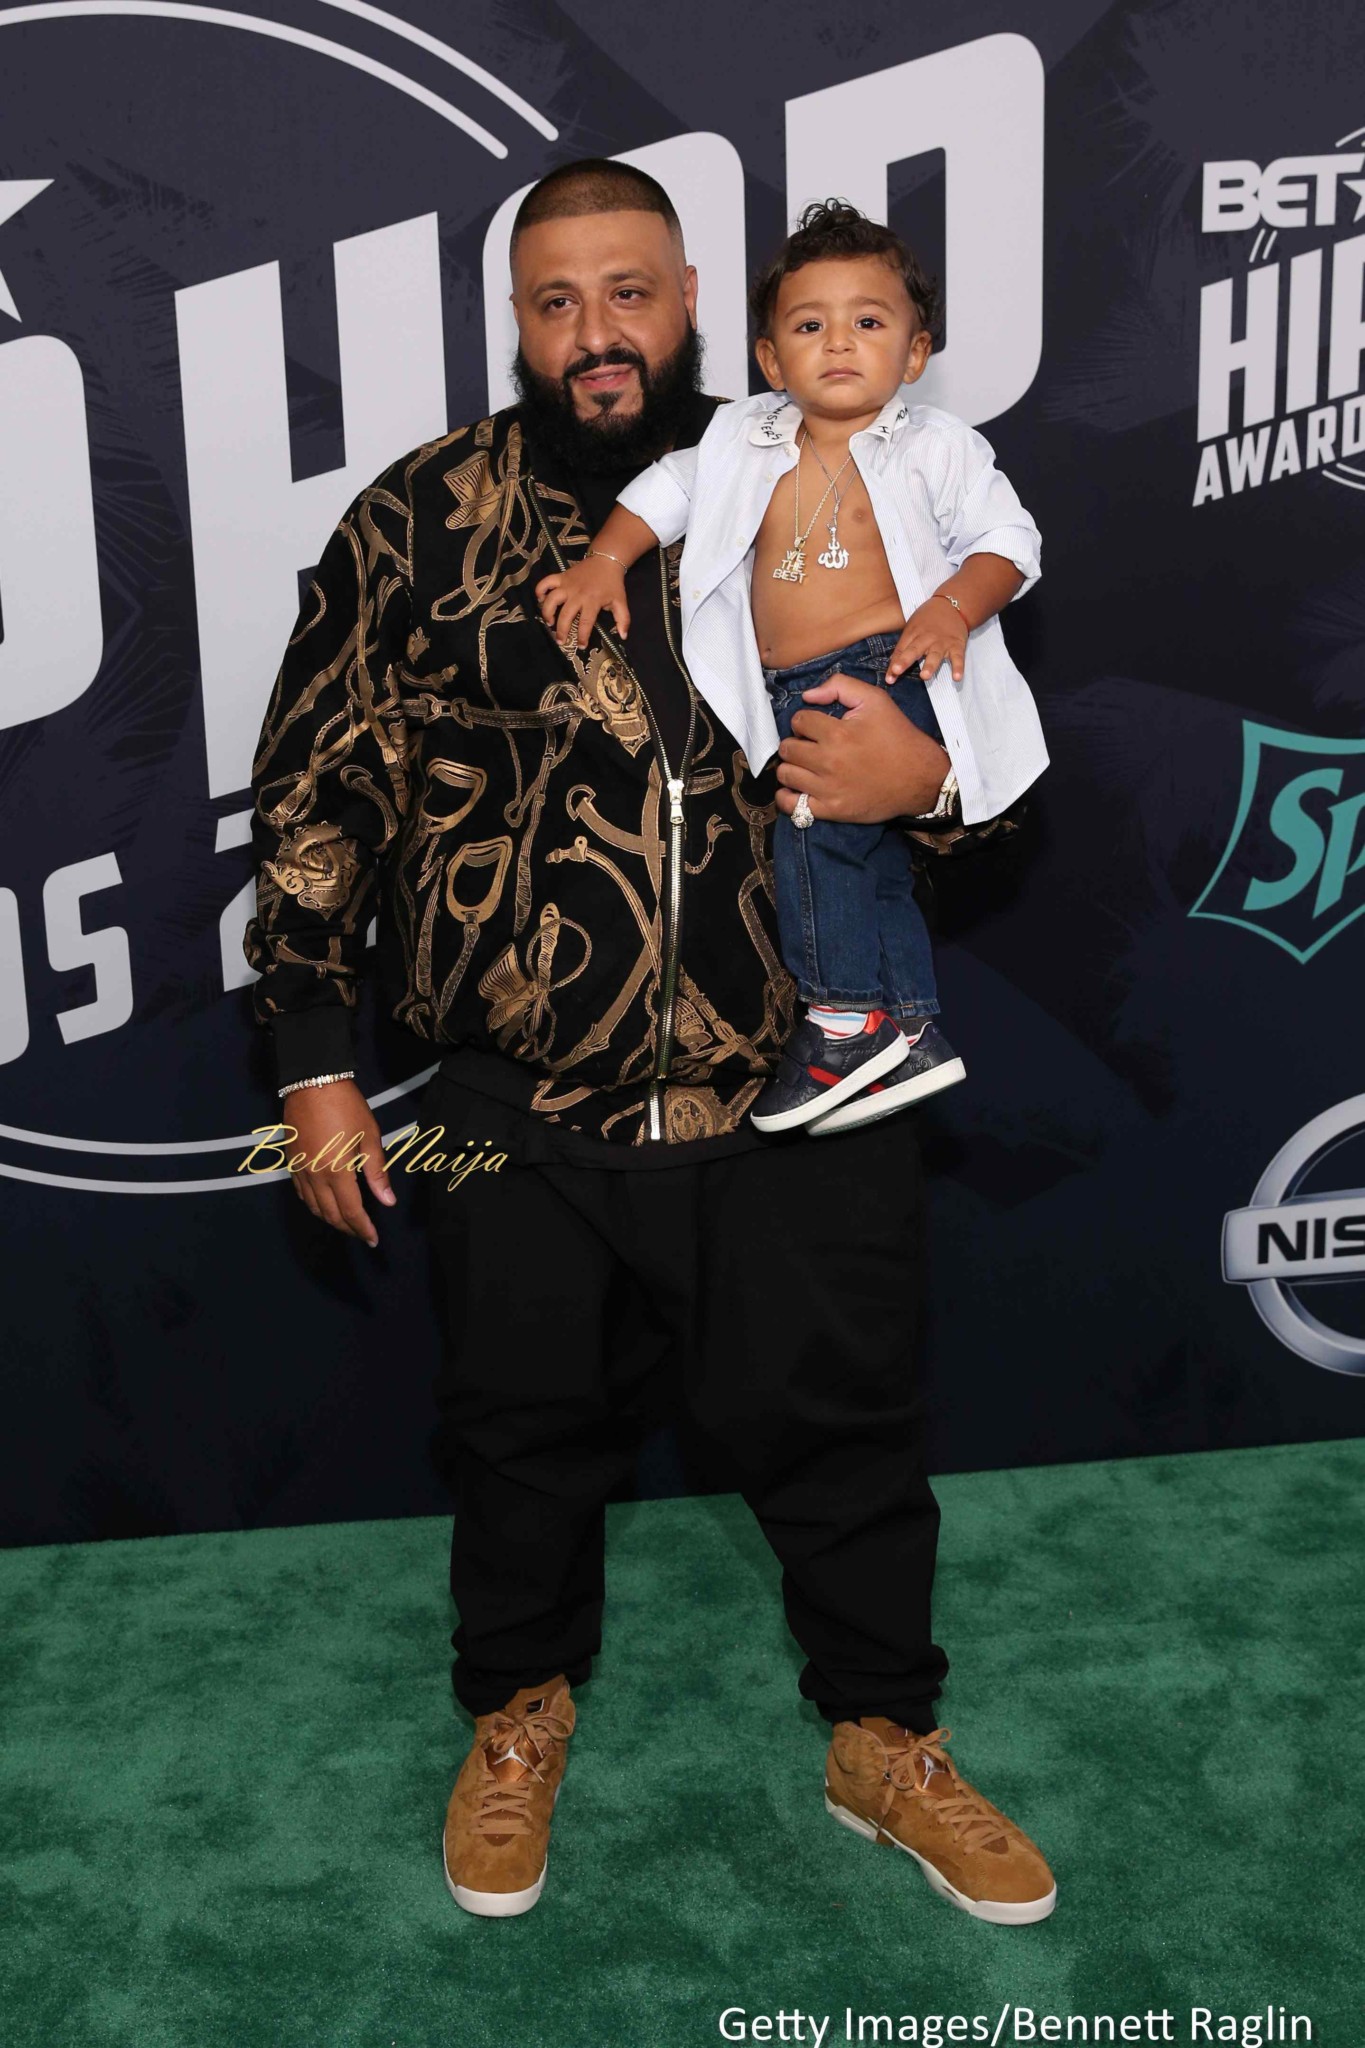 DJ Khaled, Cardi B, Migos and all the stars turn up for BET #HipHopAwards 2017